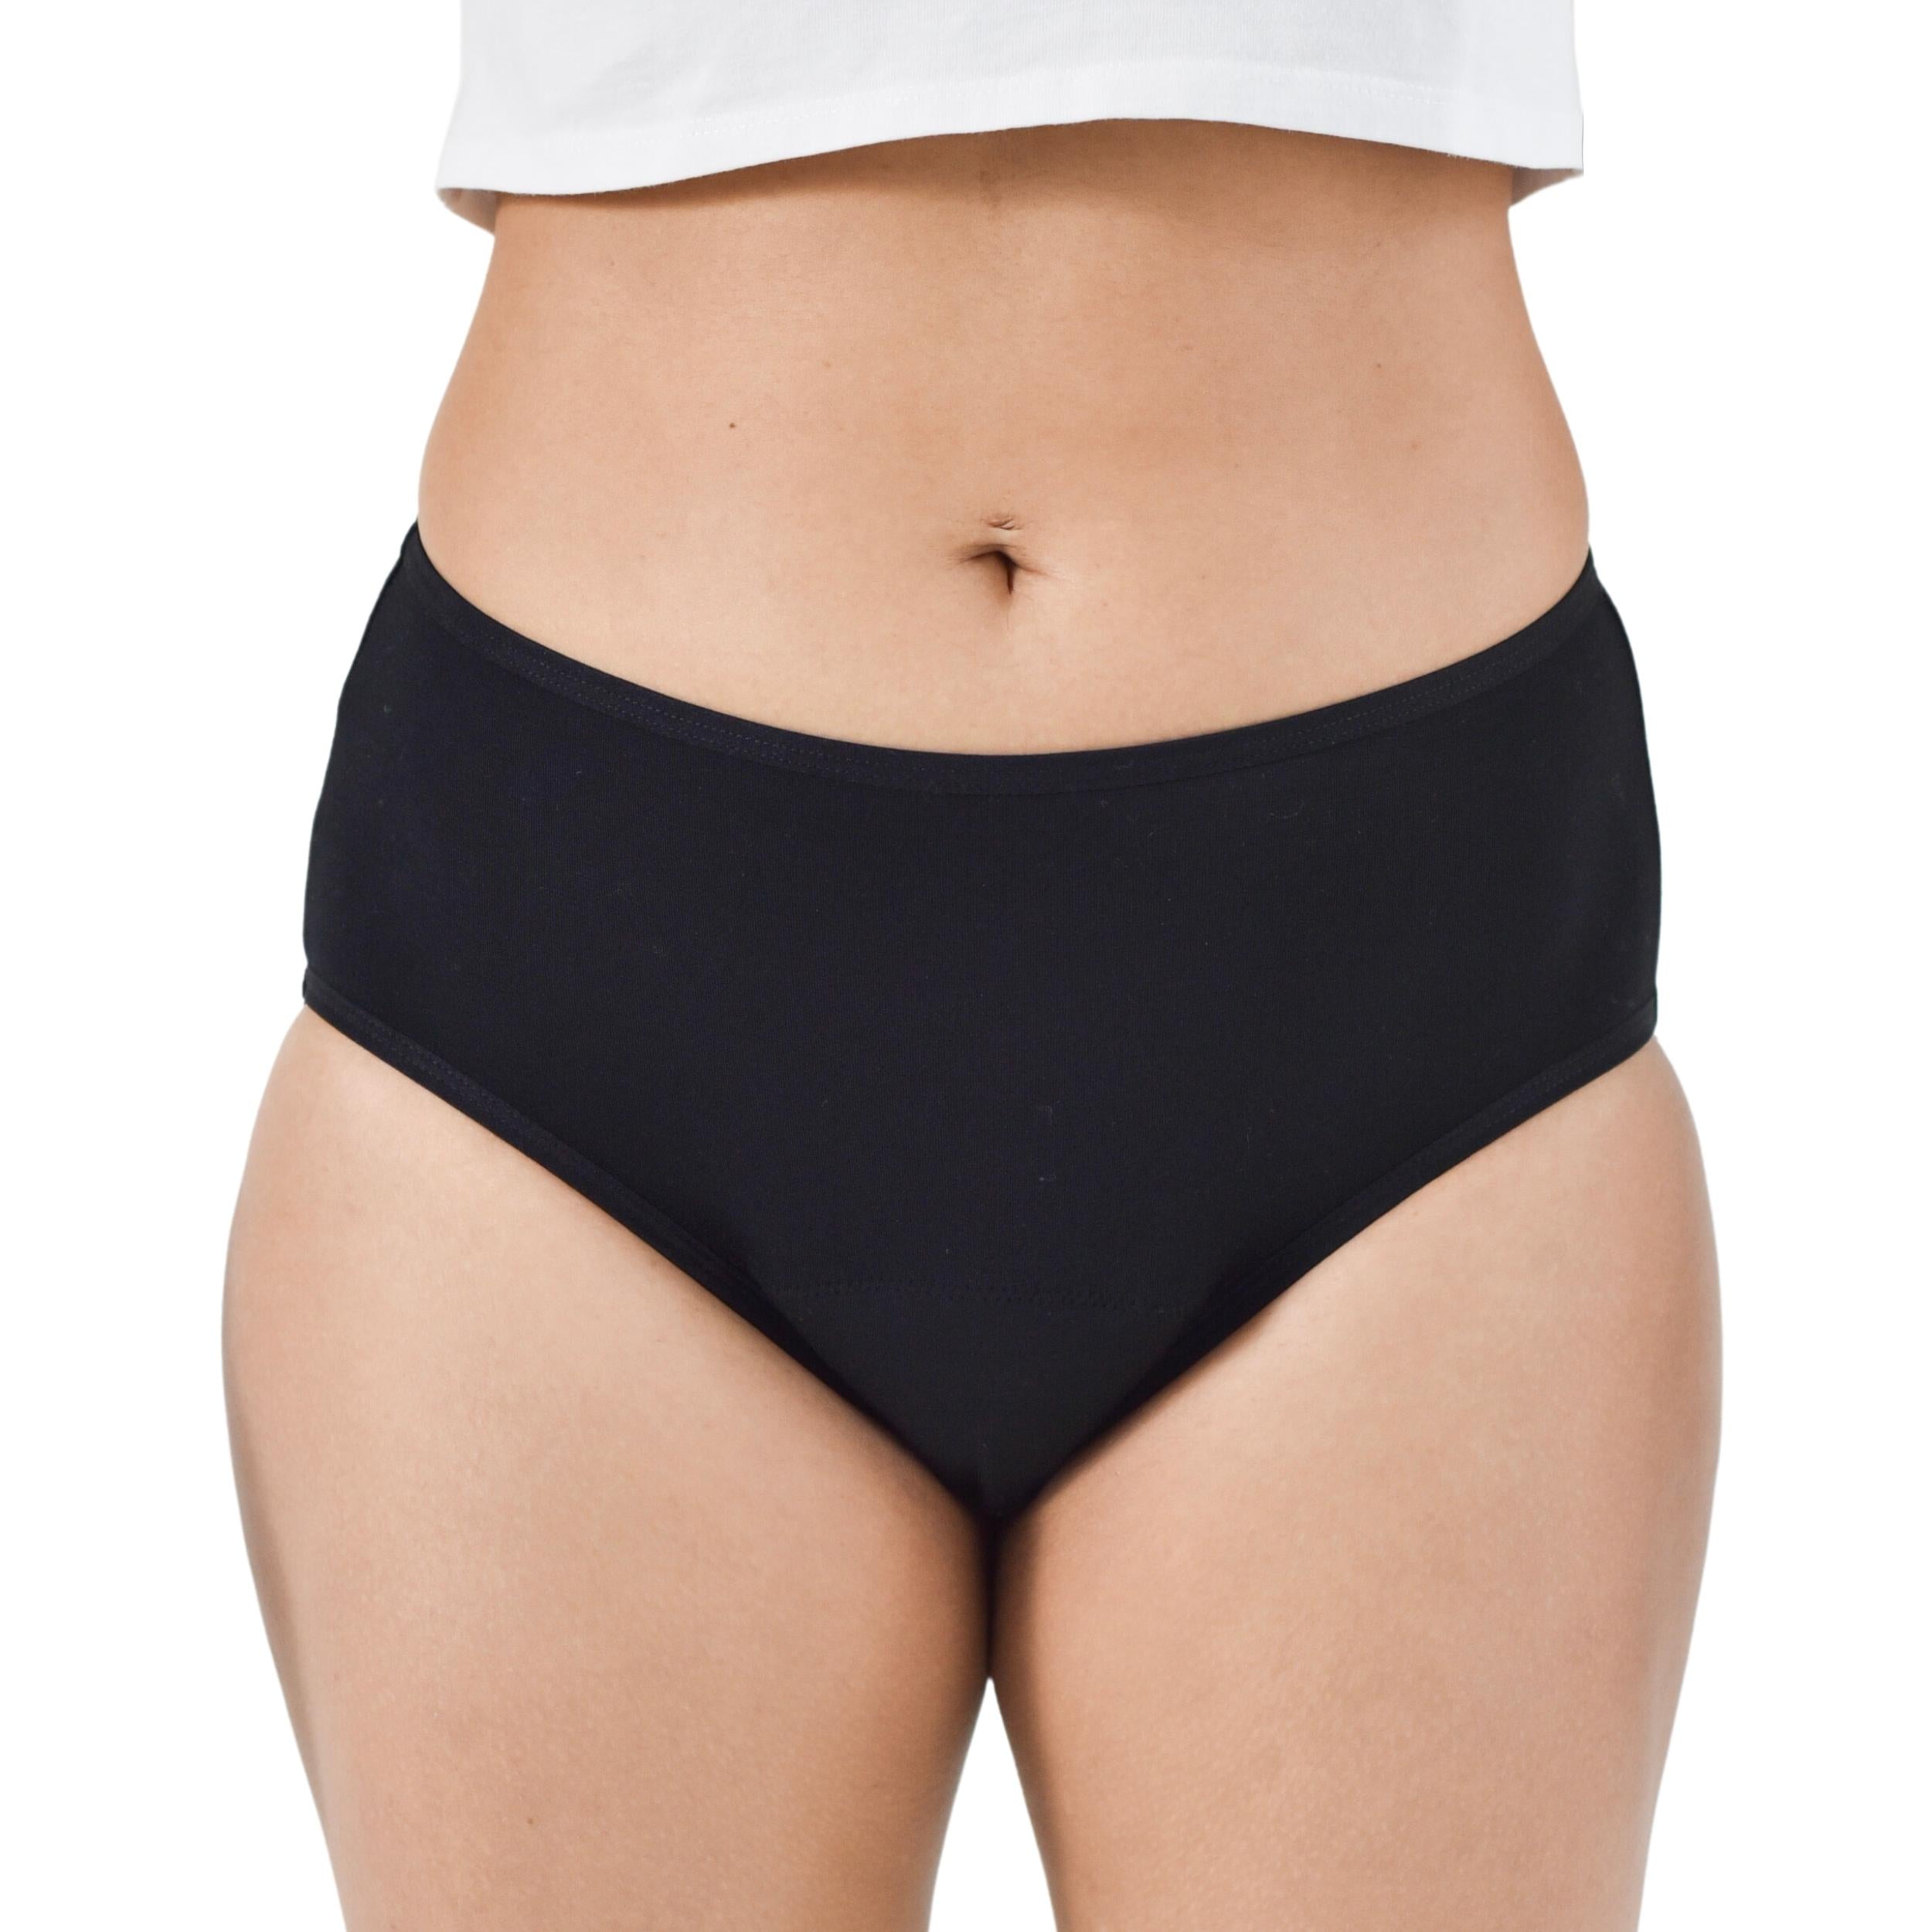 Cheeky Hipster Period Underwear | Light Flow Absorbent leak-proof period  panties | RUNS SMALL SIZE UP